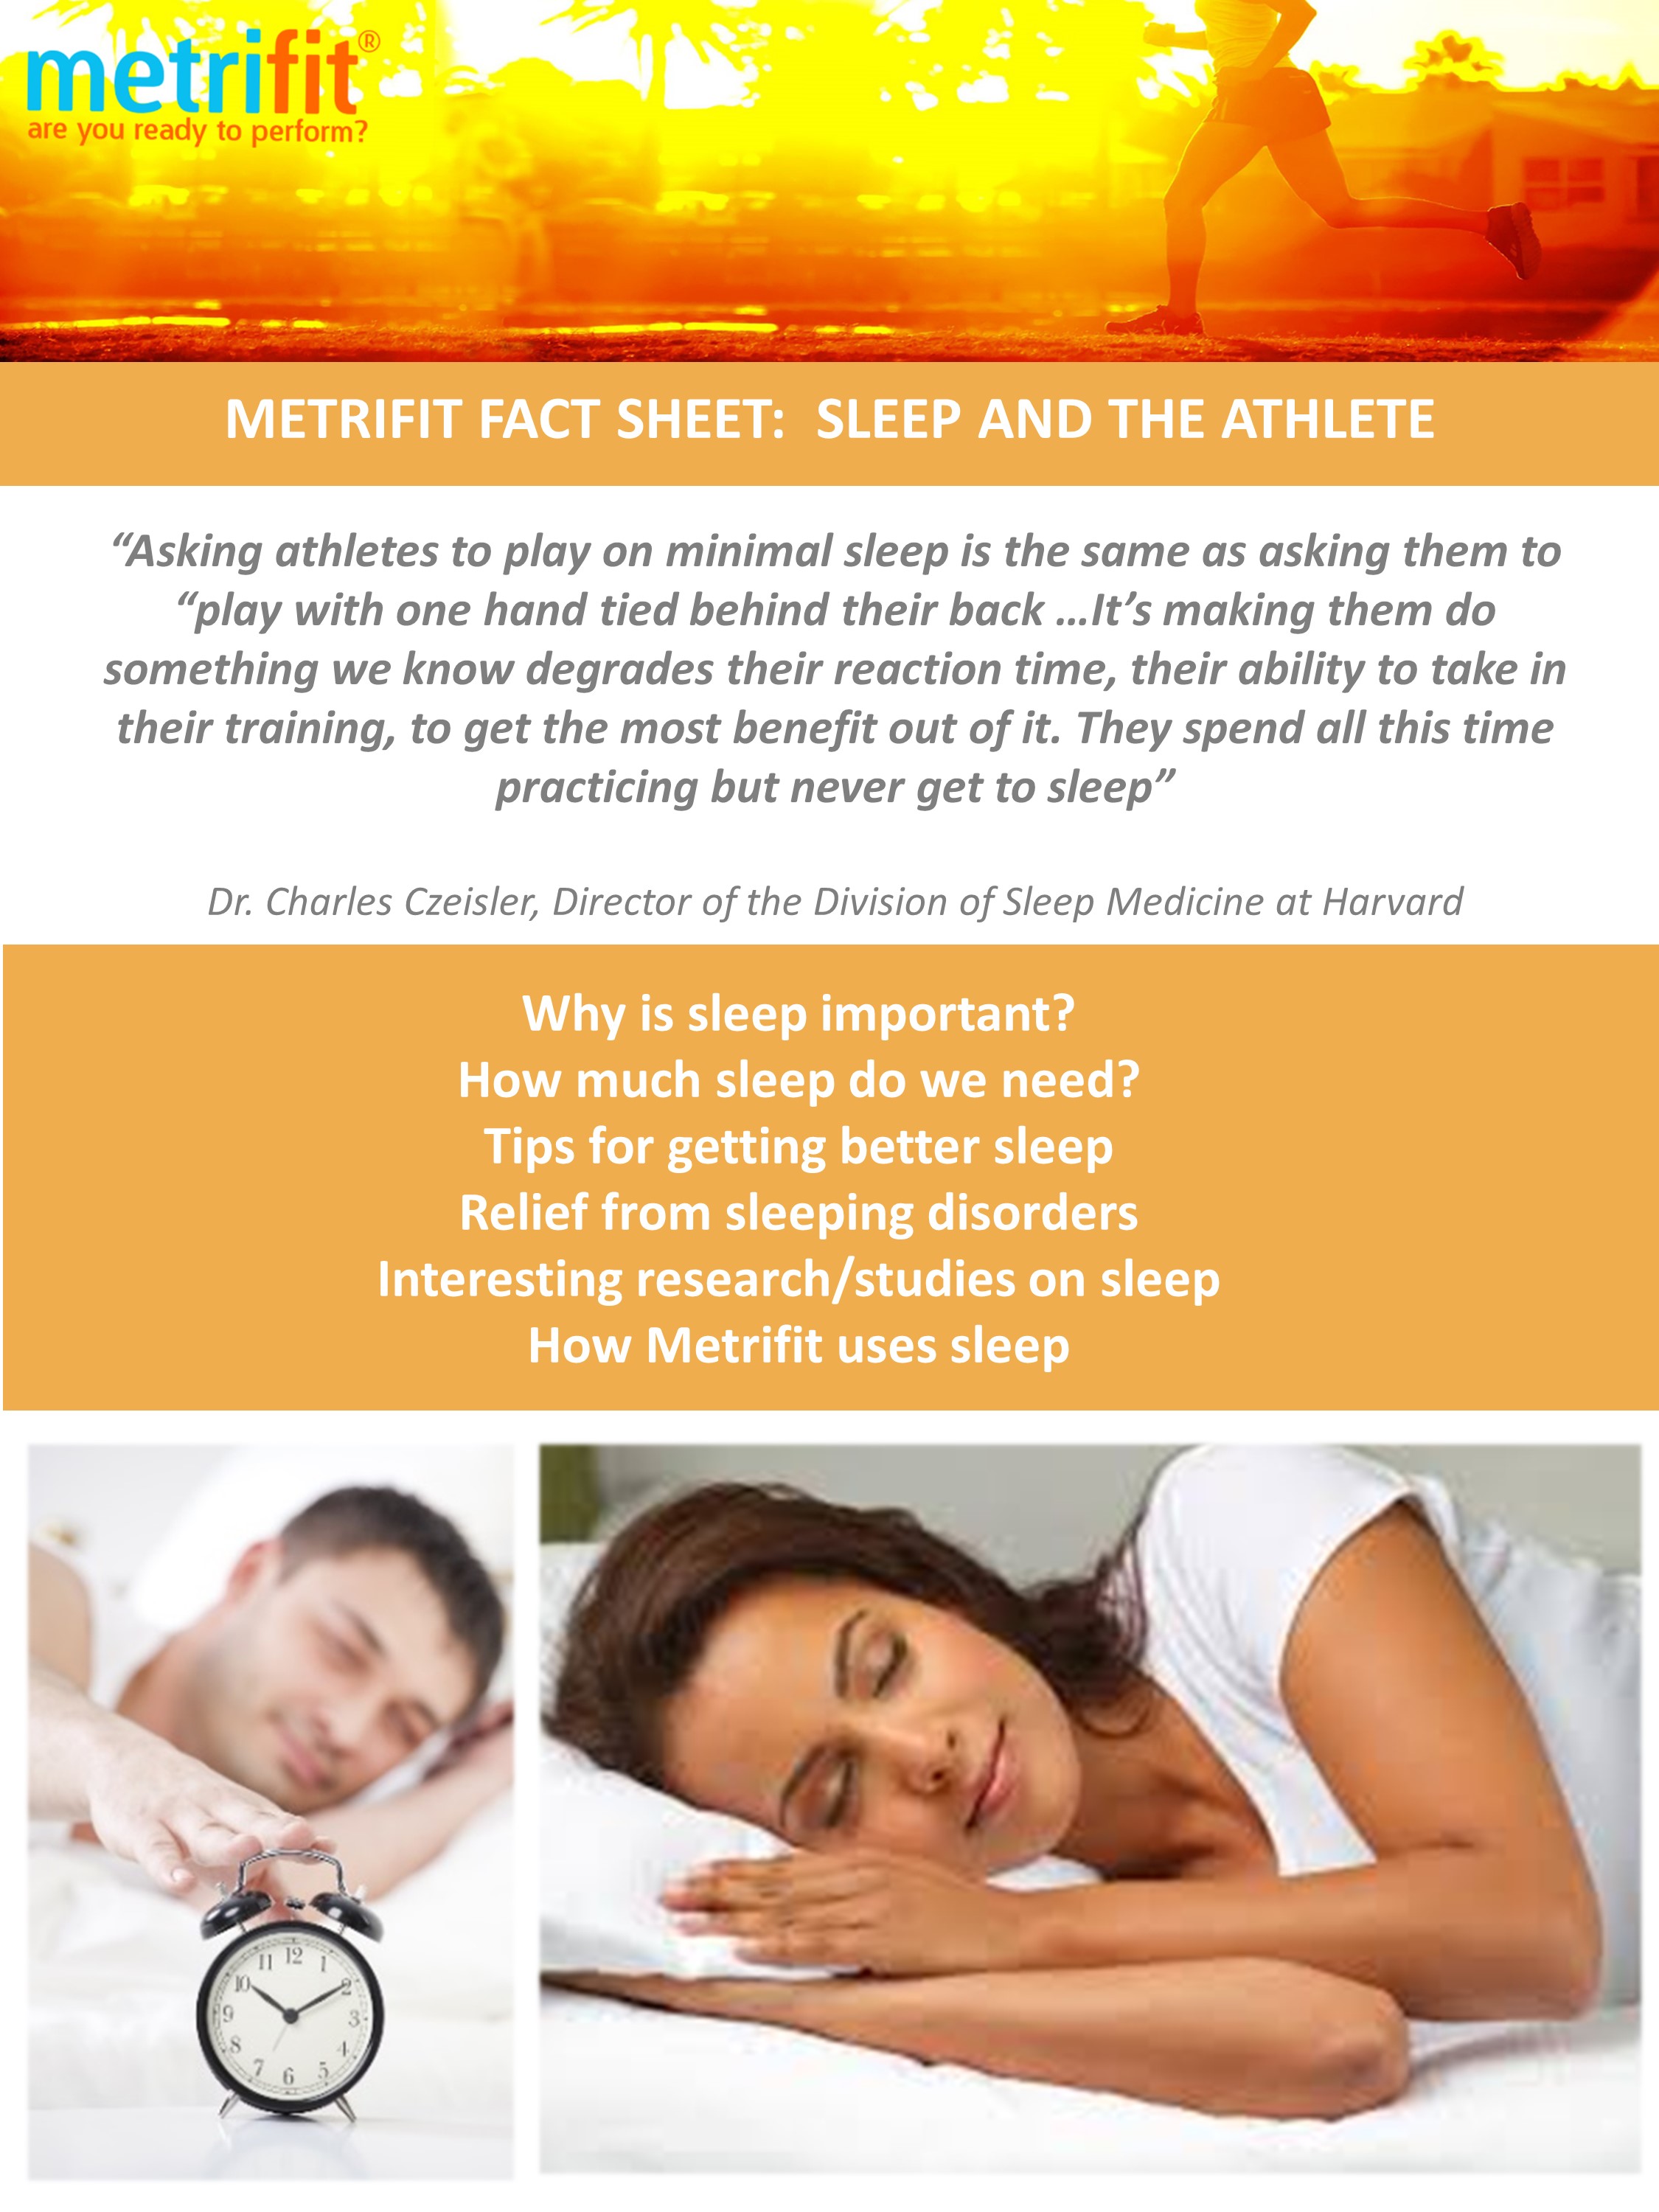 Sleep & Sports: A look at the habits of sports superstar snoozers –  Metrifit Ready to Perform